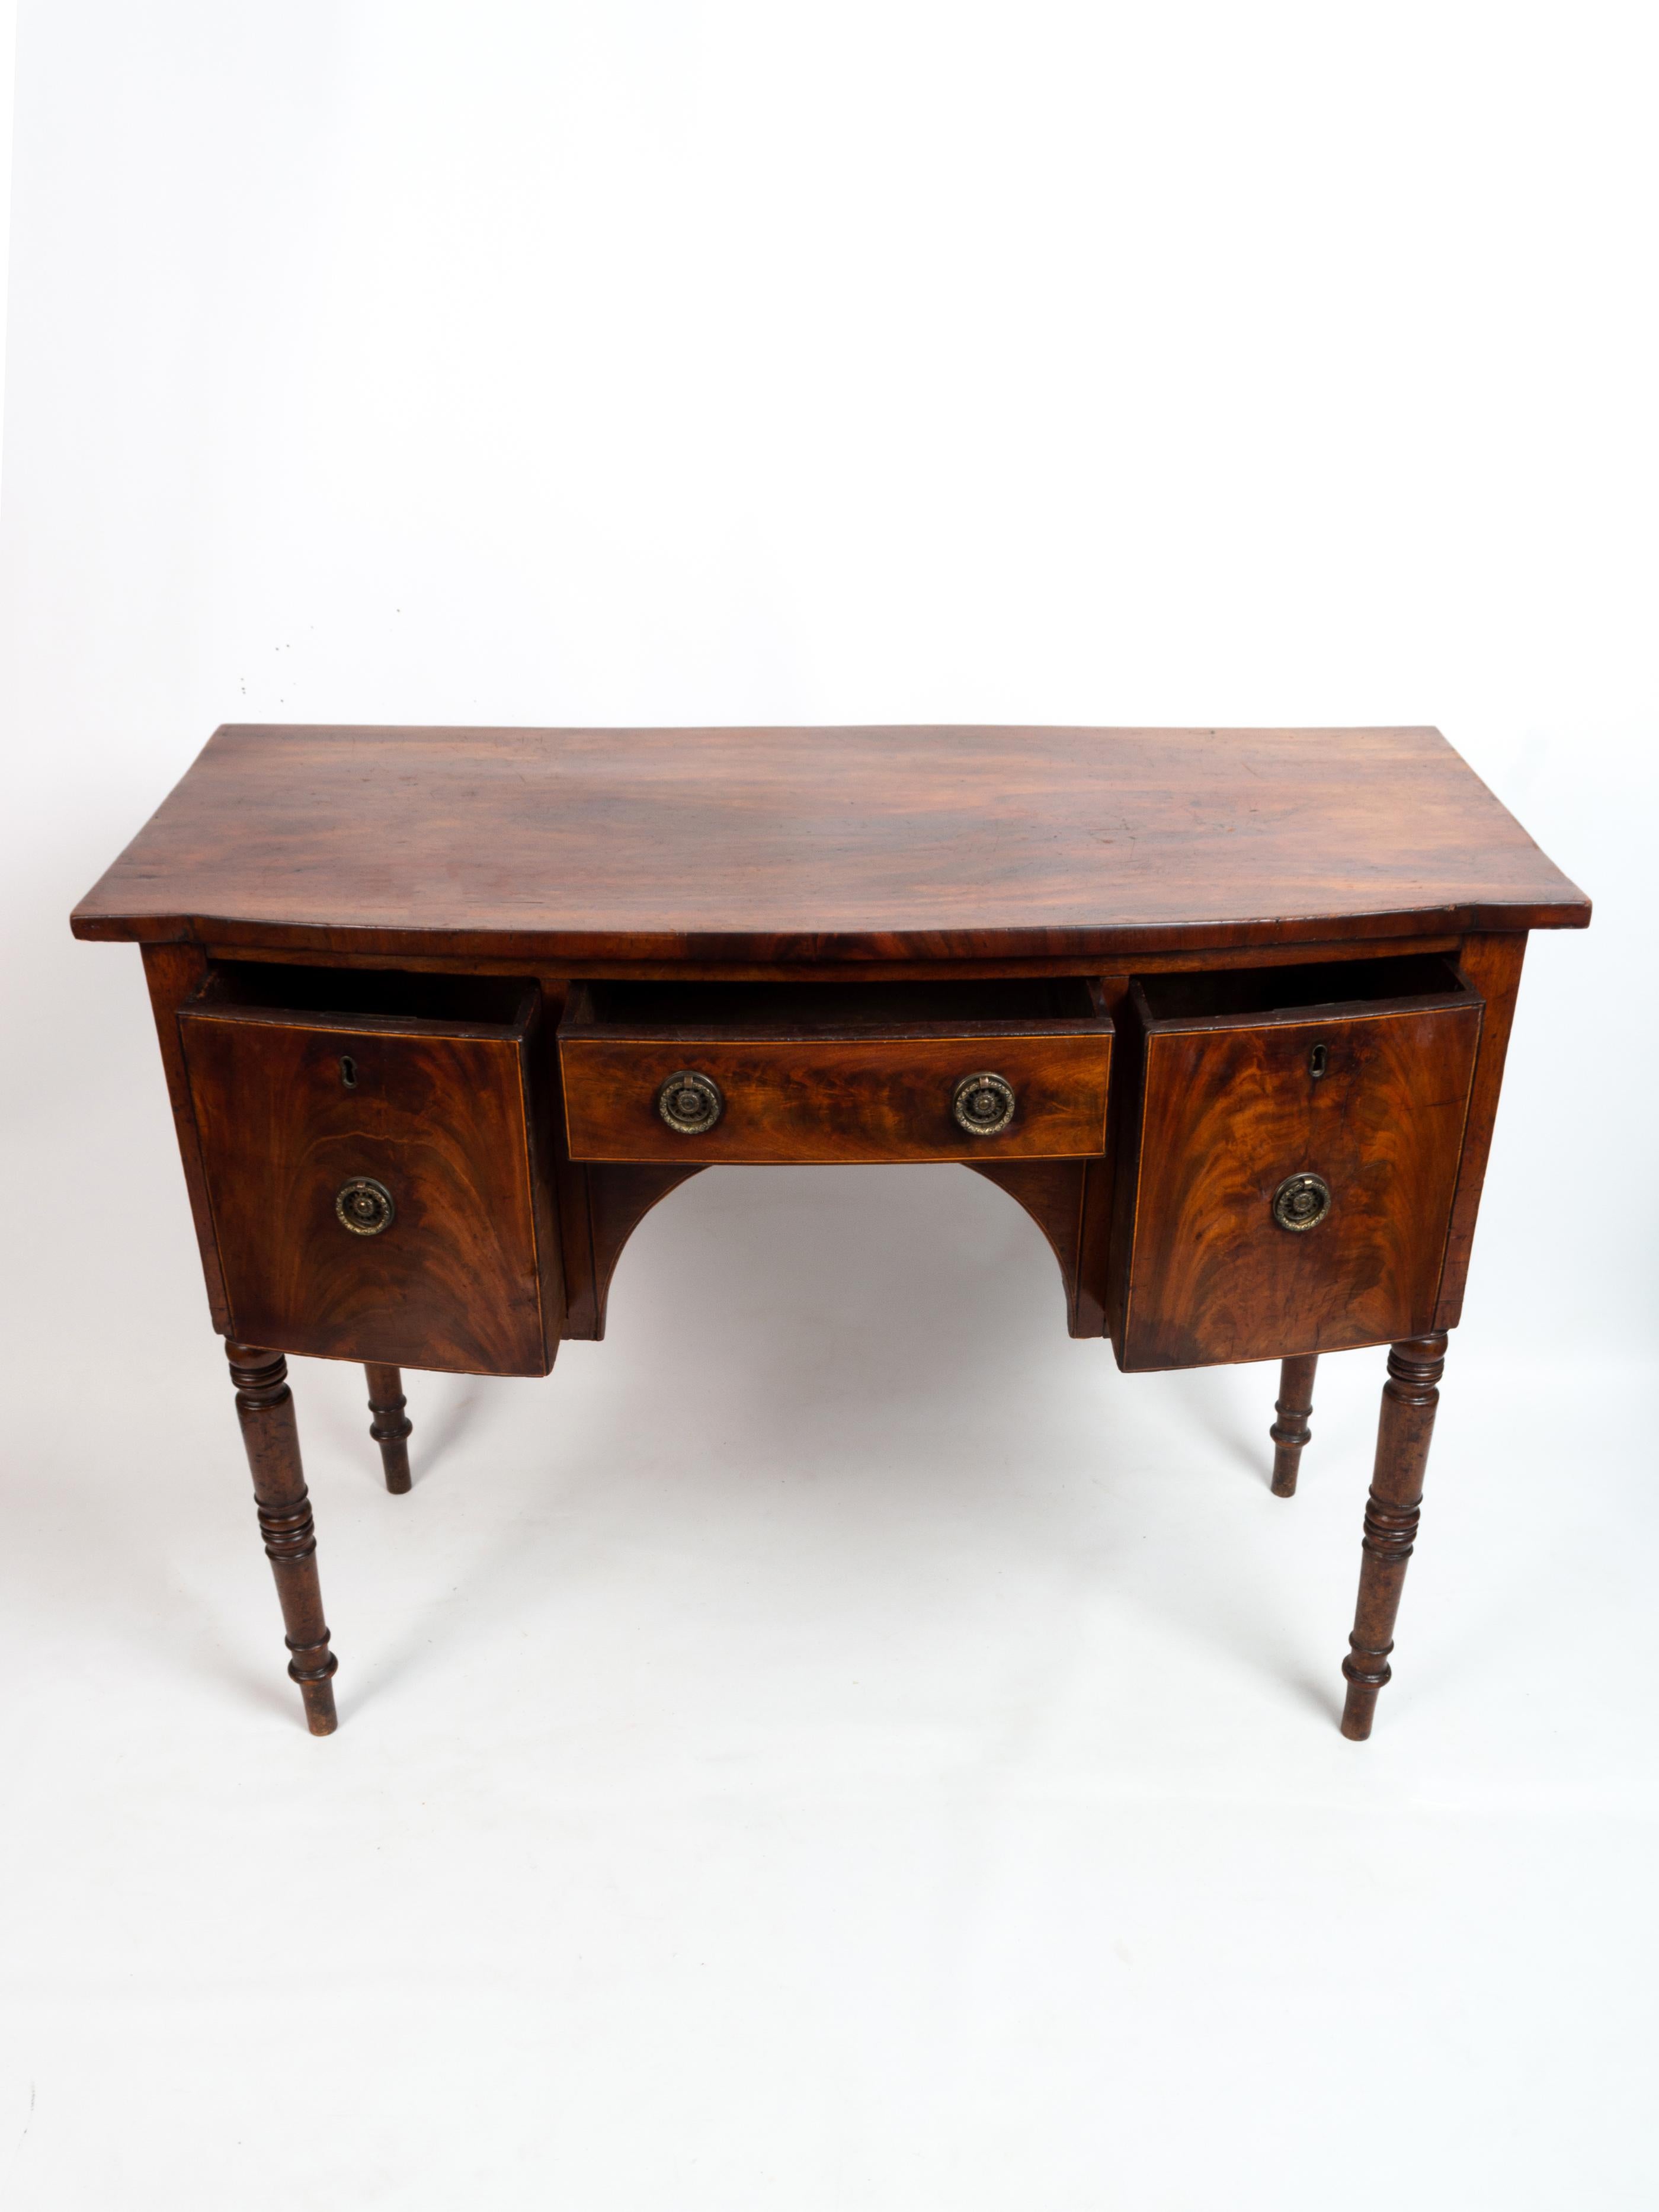 George III Antique English Georgian Flame Mahogany Sideboard Server Console Hall Table For Sale